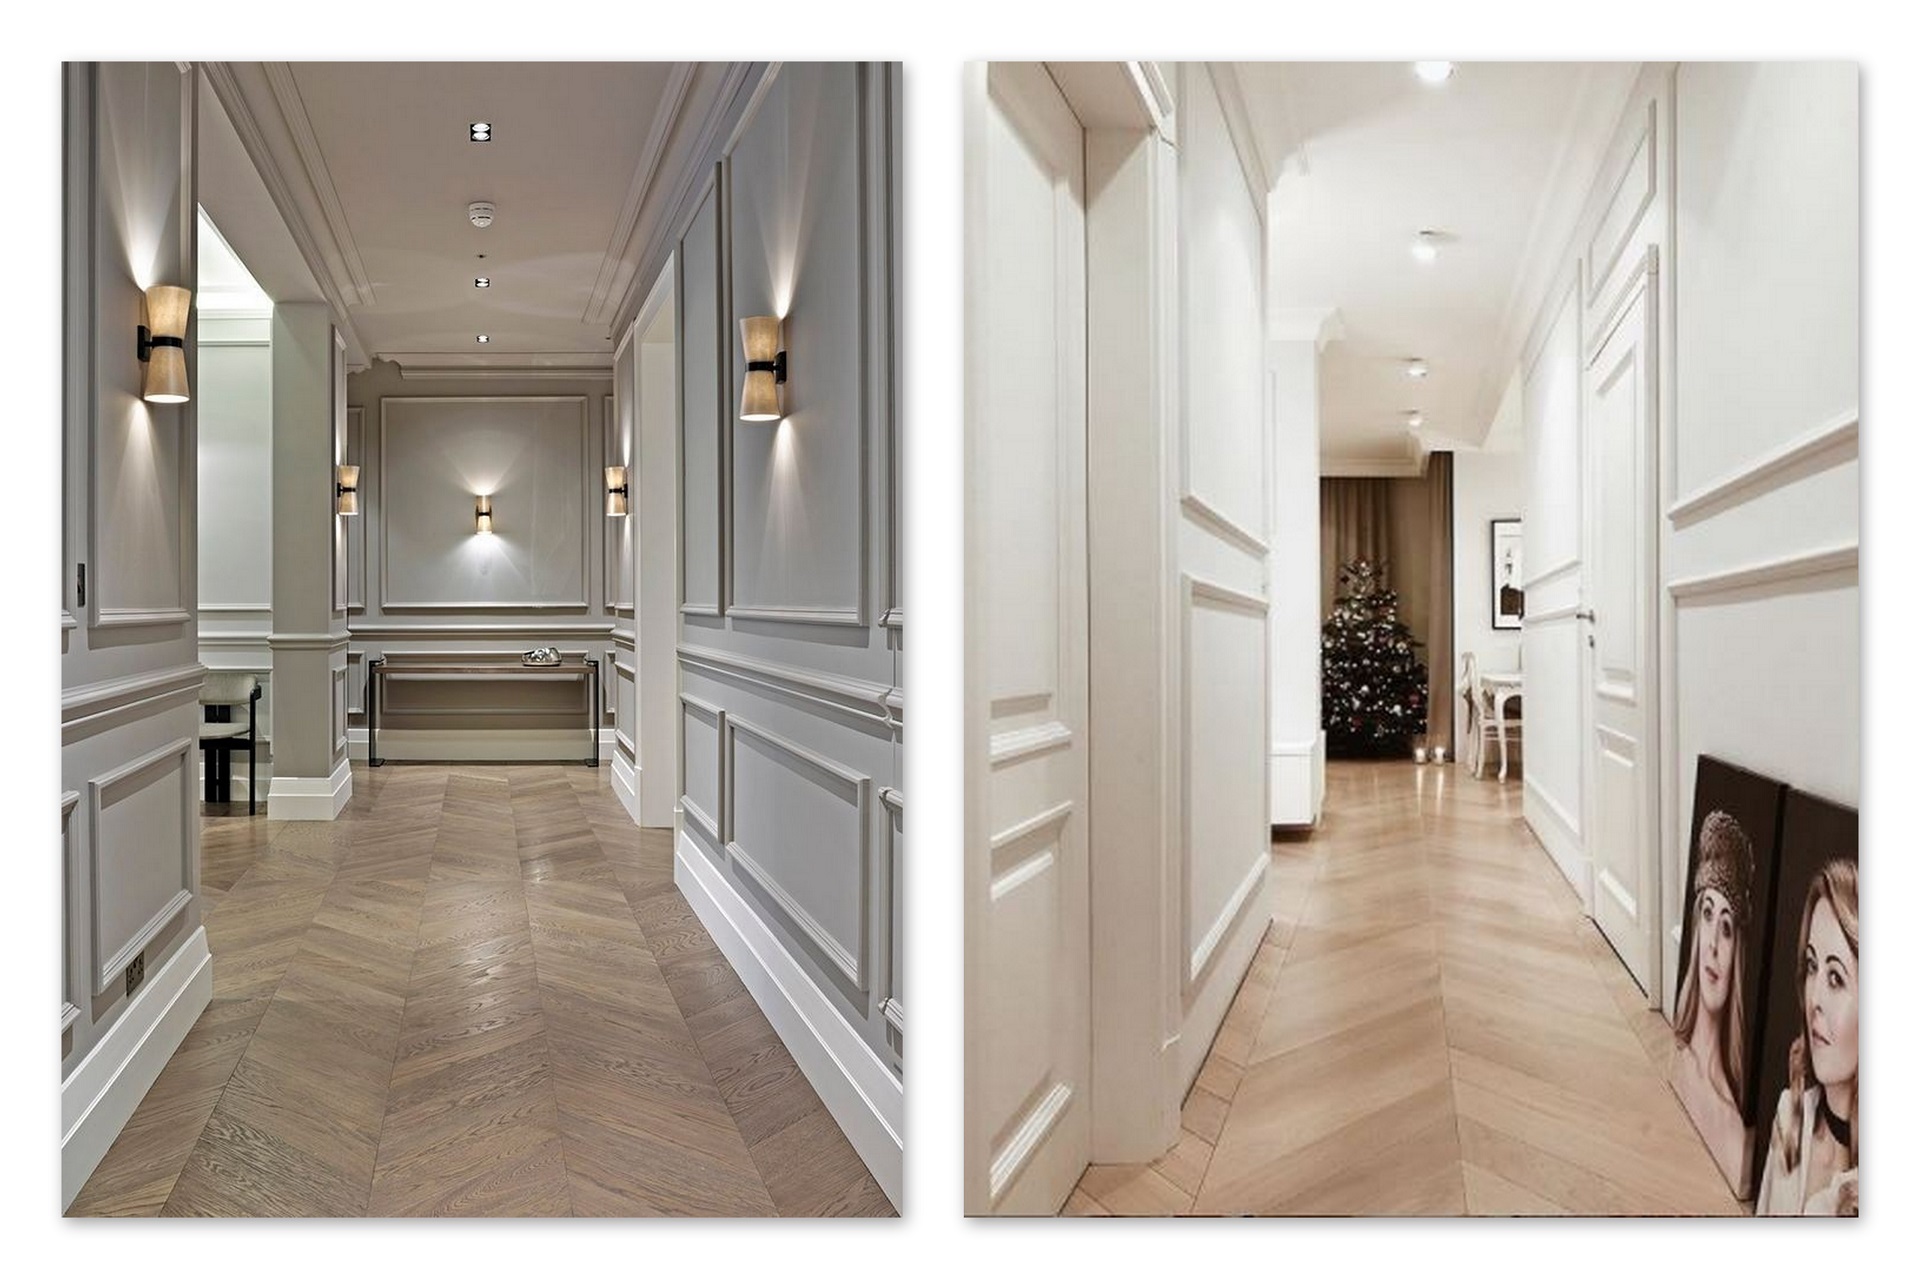 Wall molding in the hallway - a perfect solution even in a small interior